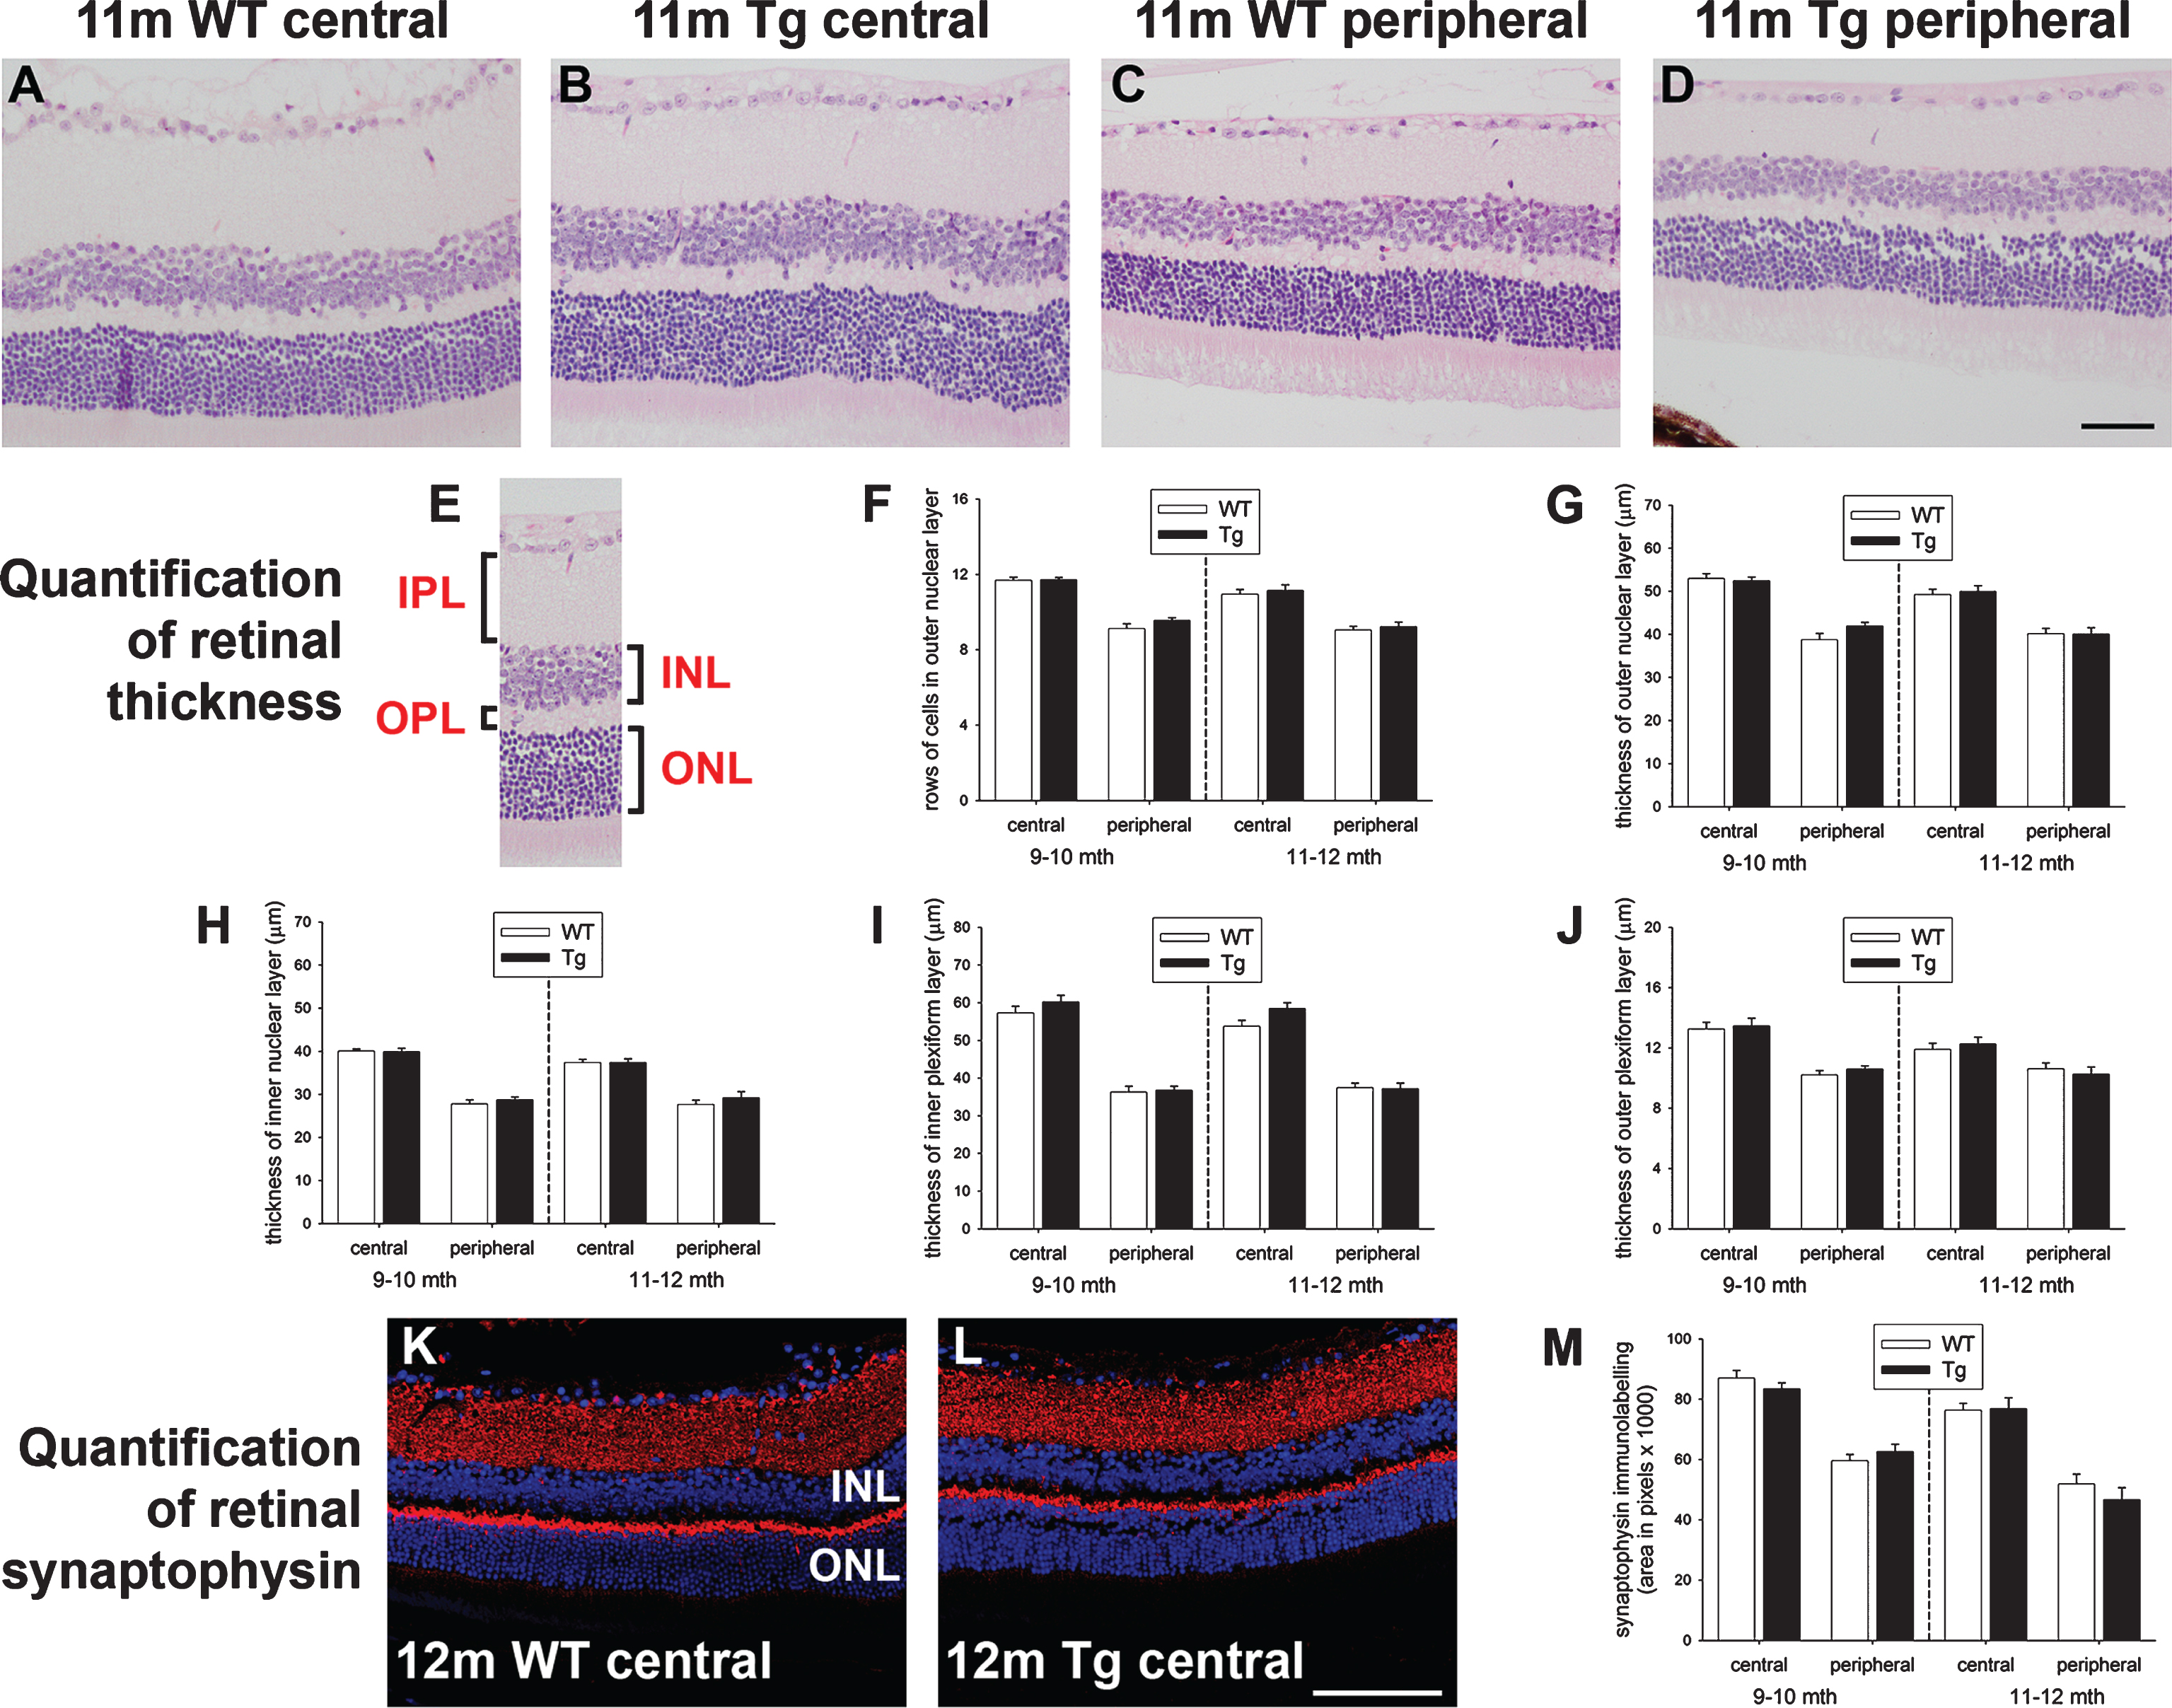 Analysis of retinal thickness and synaptic density in 9–to 12–month-old WT and Tg mice. Representative images of hematoxylin and eosin staining in the central (A, B) and peripheral (C, D) retinas of 11-month-old WT and Tg mice. E) Identification of the retinal layers. F, G) Quantification of the number of rows of cells and the thickness of the outer nuclear layer (ONL). H-J) Quantification of the thicknesses of the inner nuclear layer (INL), inner plexiform layer (IPL), outer plexiform layer (OPL). K-M) Representative images of synaptophysin immunolabeling in the central retinas of 12-month-old WT and Tg mice. Quantification of synaptophysin density in the central and peripheral retina is also shown. In each case, data are expressed as mean±SEM, where n = 10 for each age-matched group. Student’s unpaired t-tests revealed no significant differences. Scale bars: 50 μm.